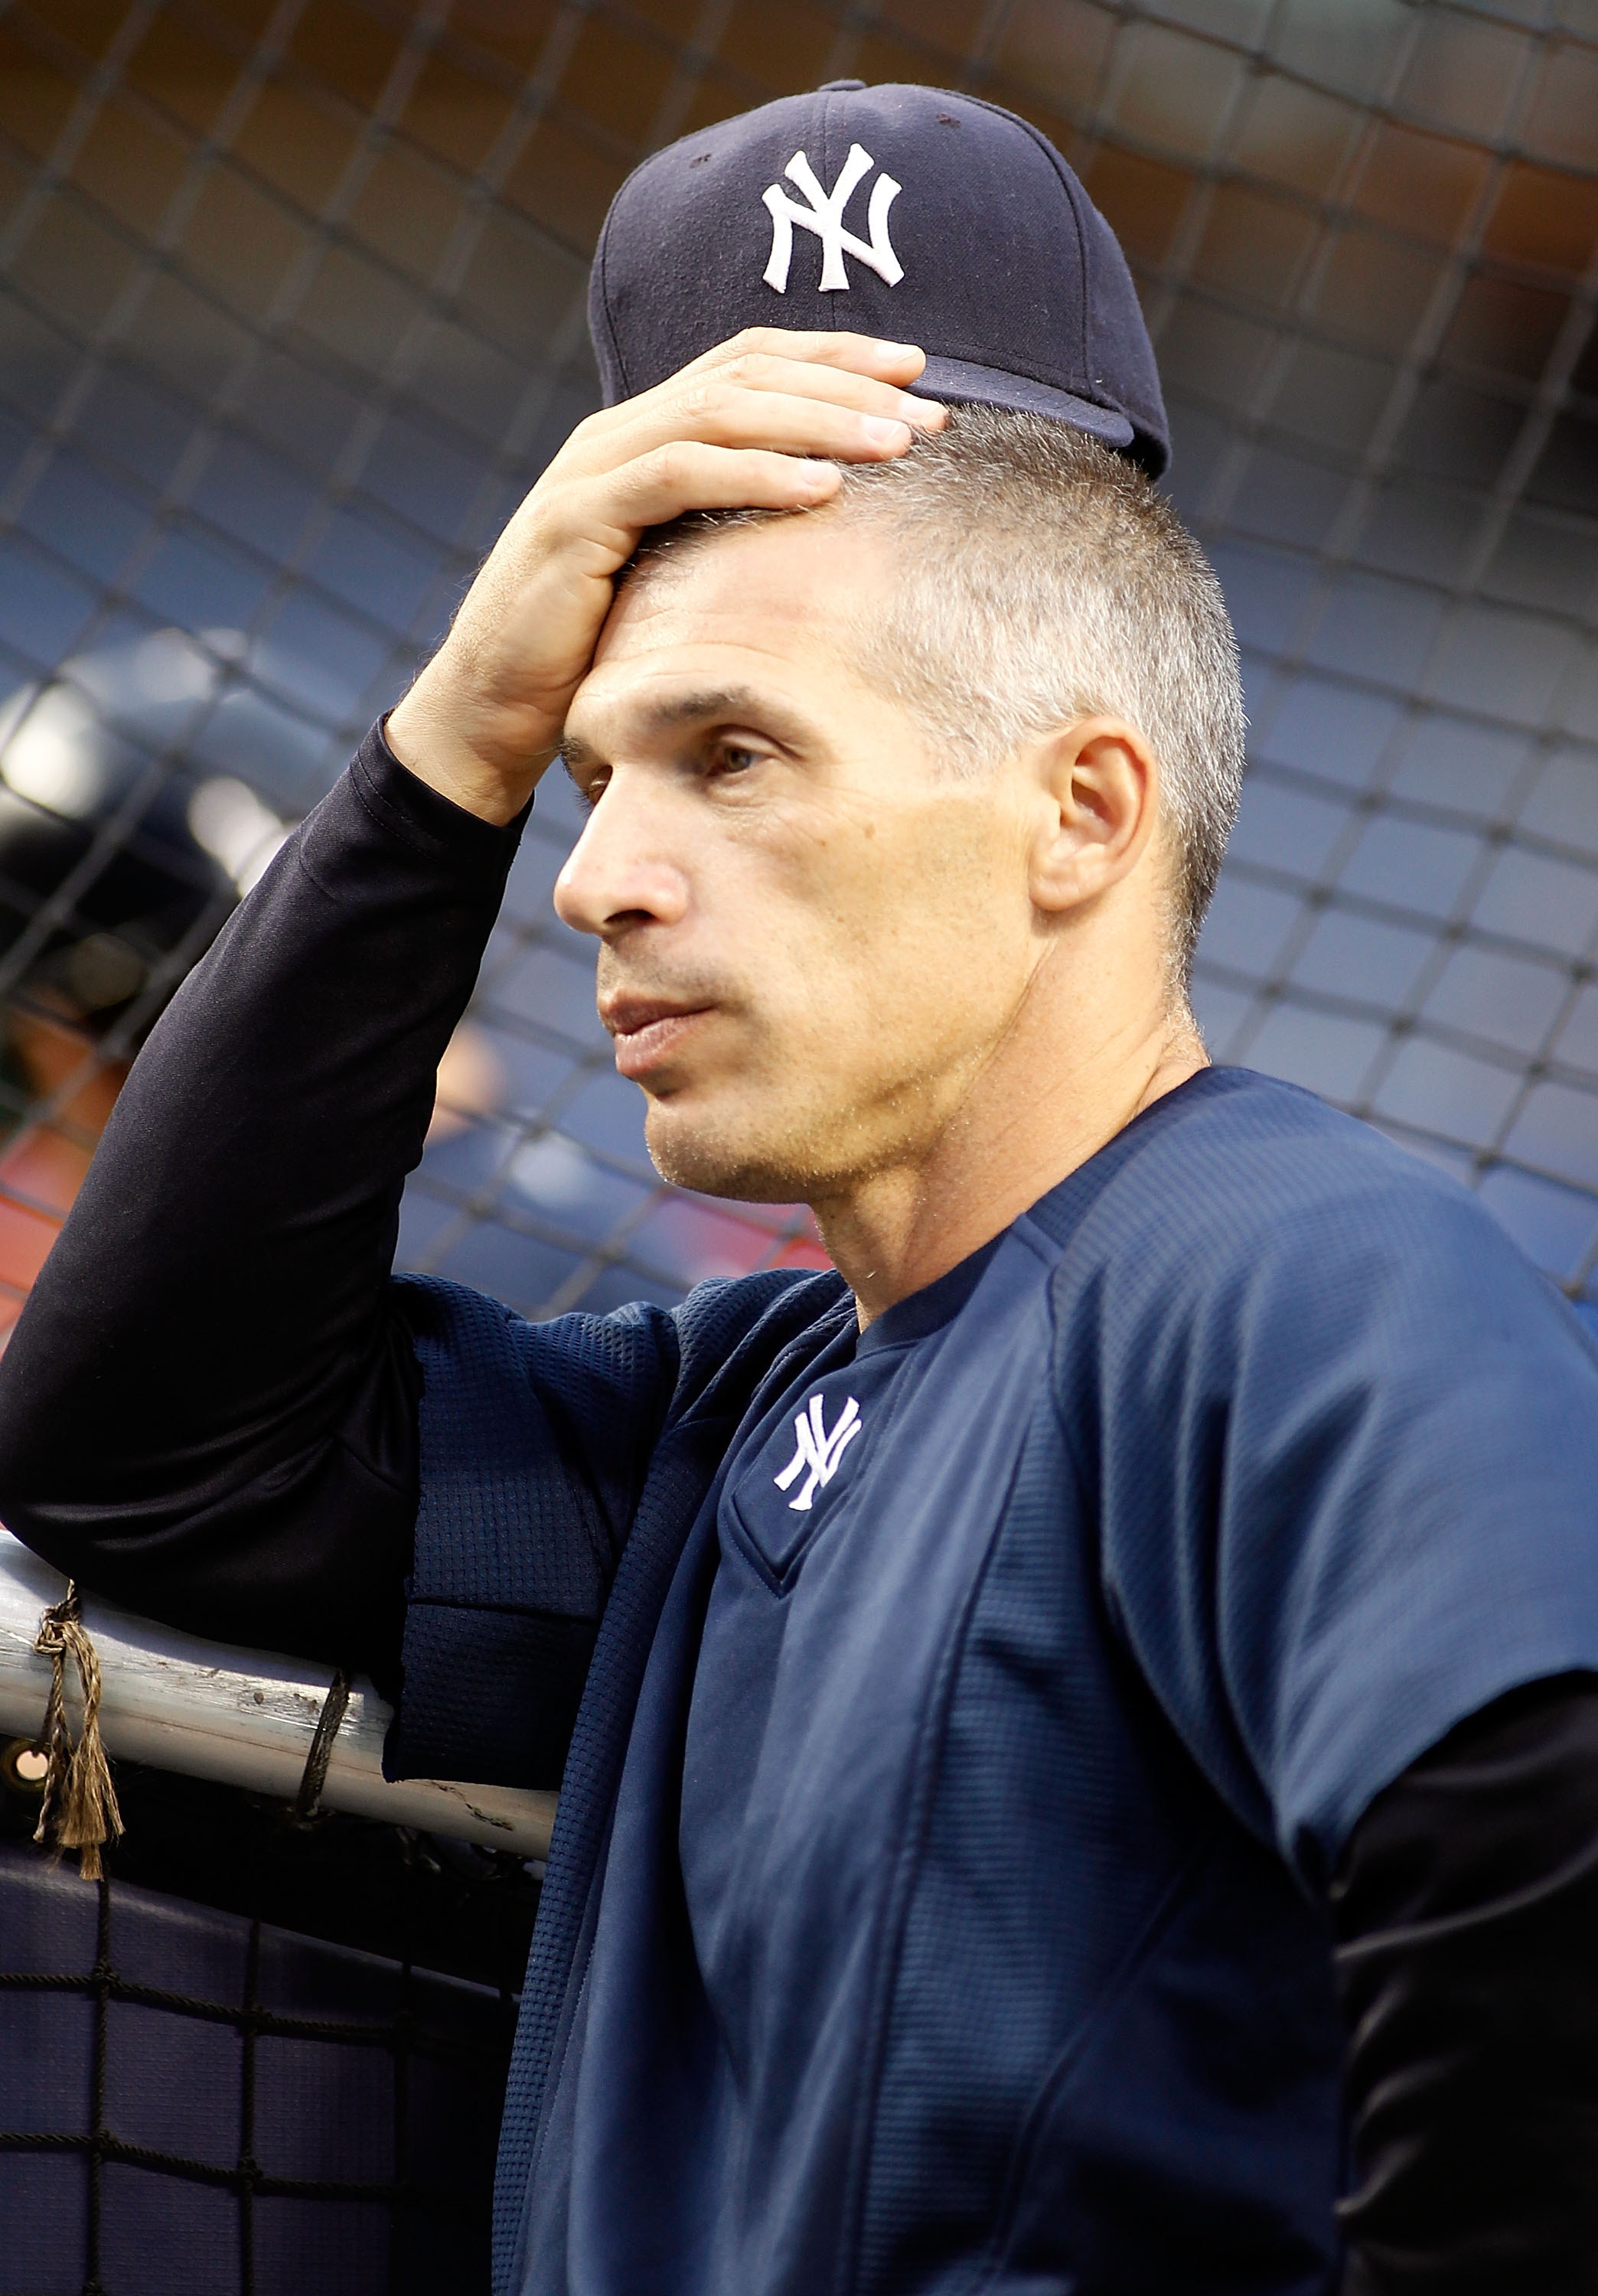 NEW YORK - SEPTEMBER 26: Manager Joe Girardi #28 of the New York Yankees looks on during warm-ups prior to their game against the Boston Red Sox on September 26, 2010 at Yankee Stadium in the Bronx borough of New York City.  (Photo by Mike Stobe/Getty Ima